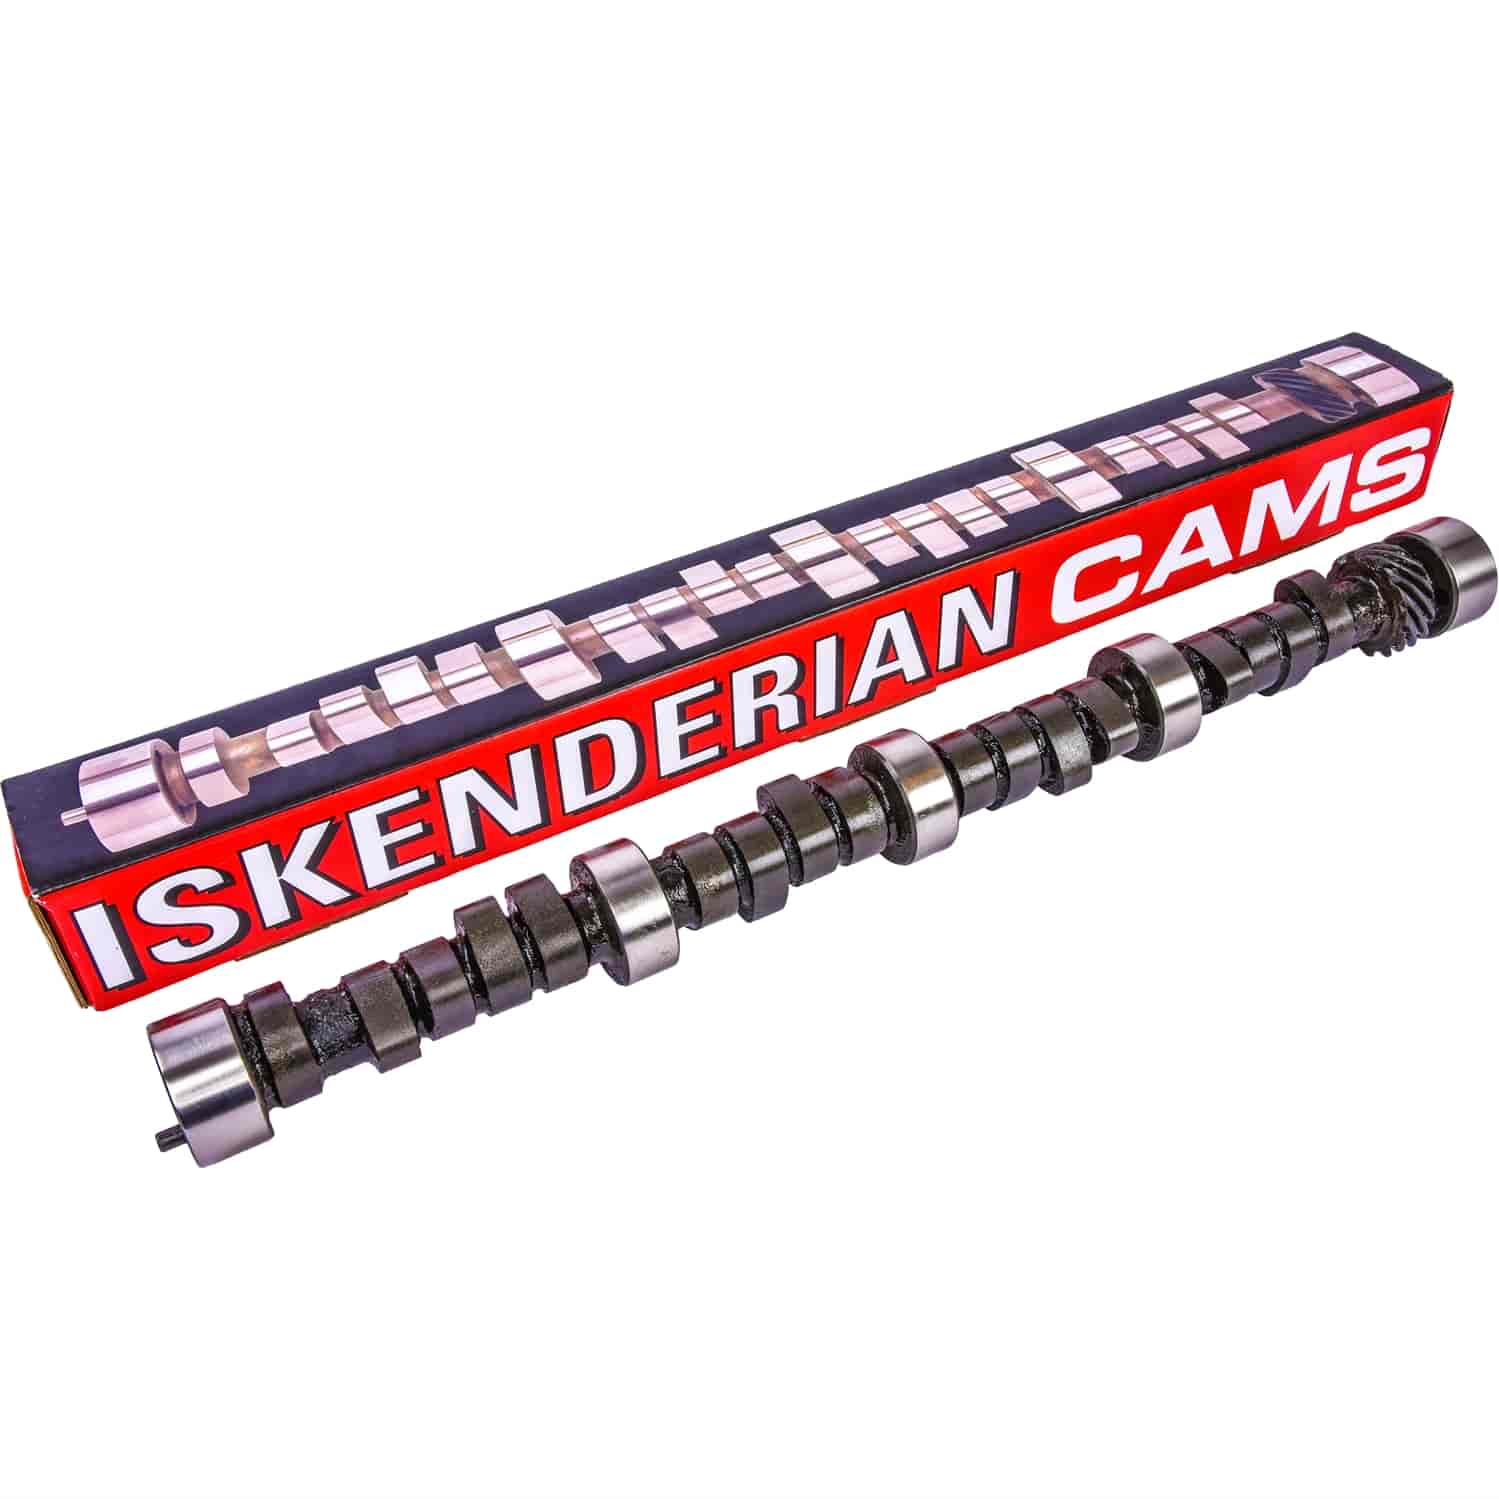 Isky Racing Cams 201288 Hydraulic Camshaft for Small Block Chevy